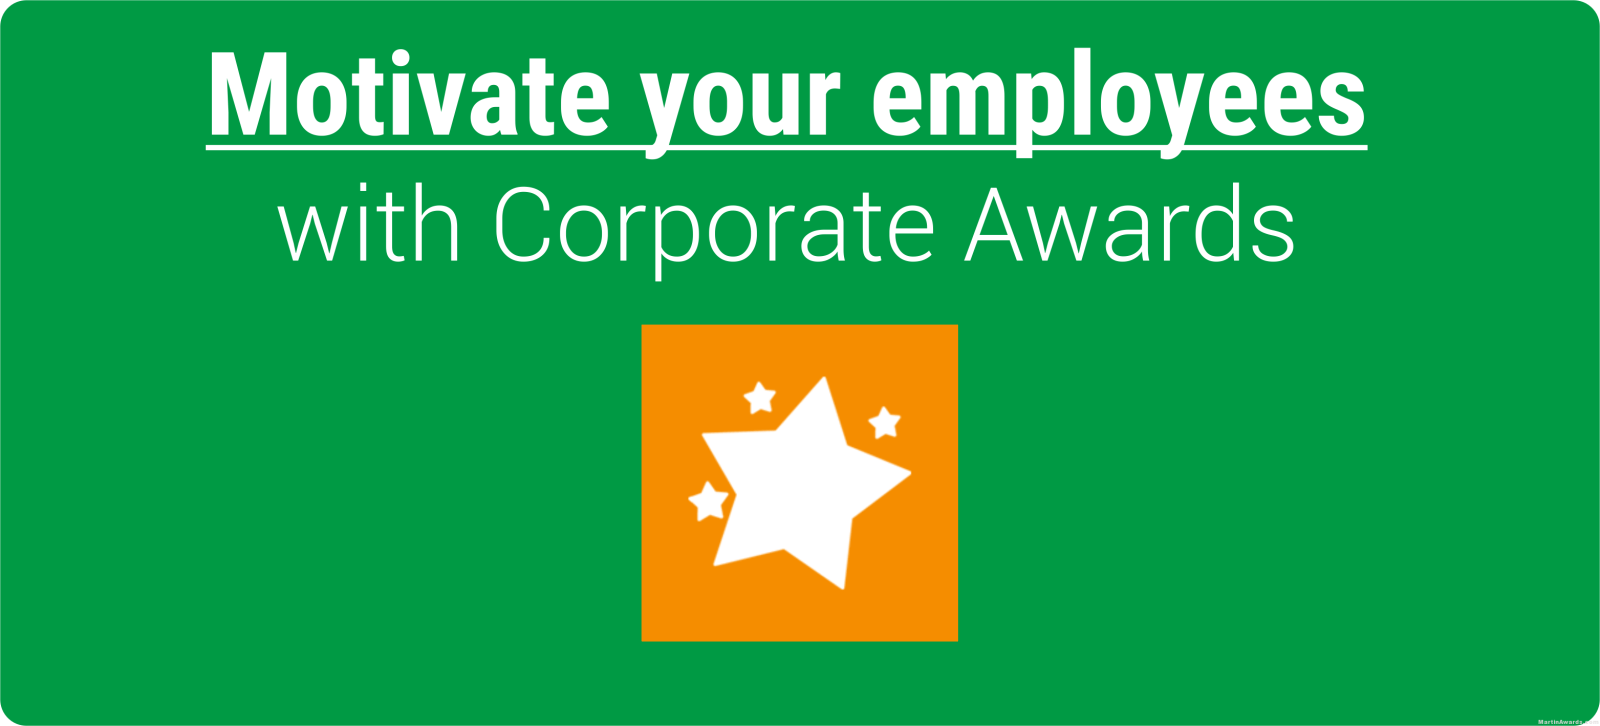 Motivate your employees with corporate awards